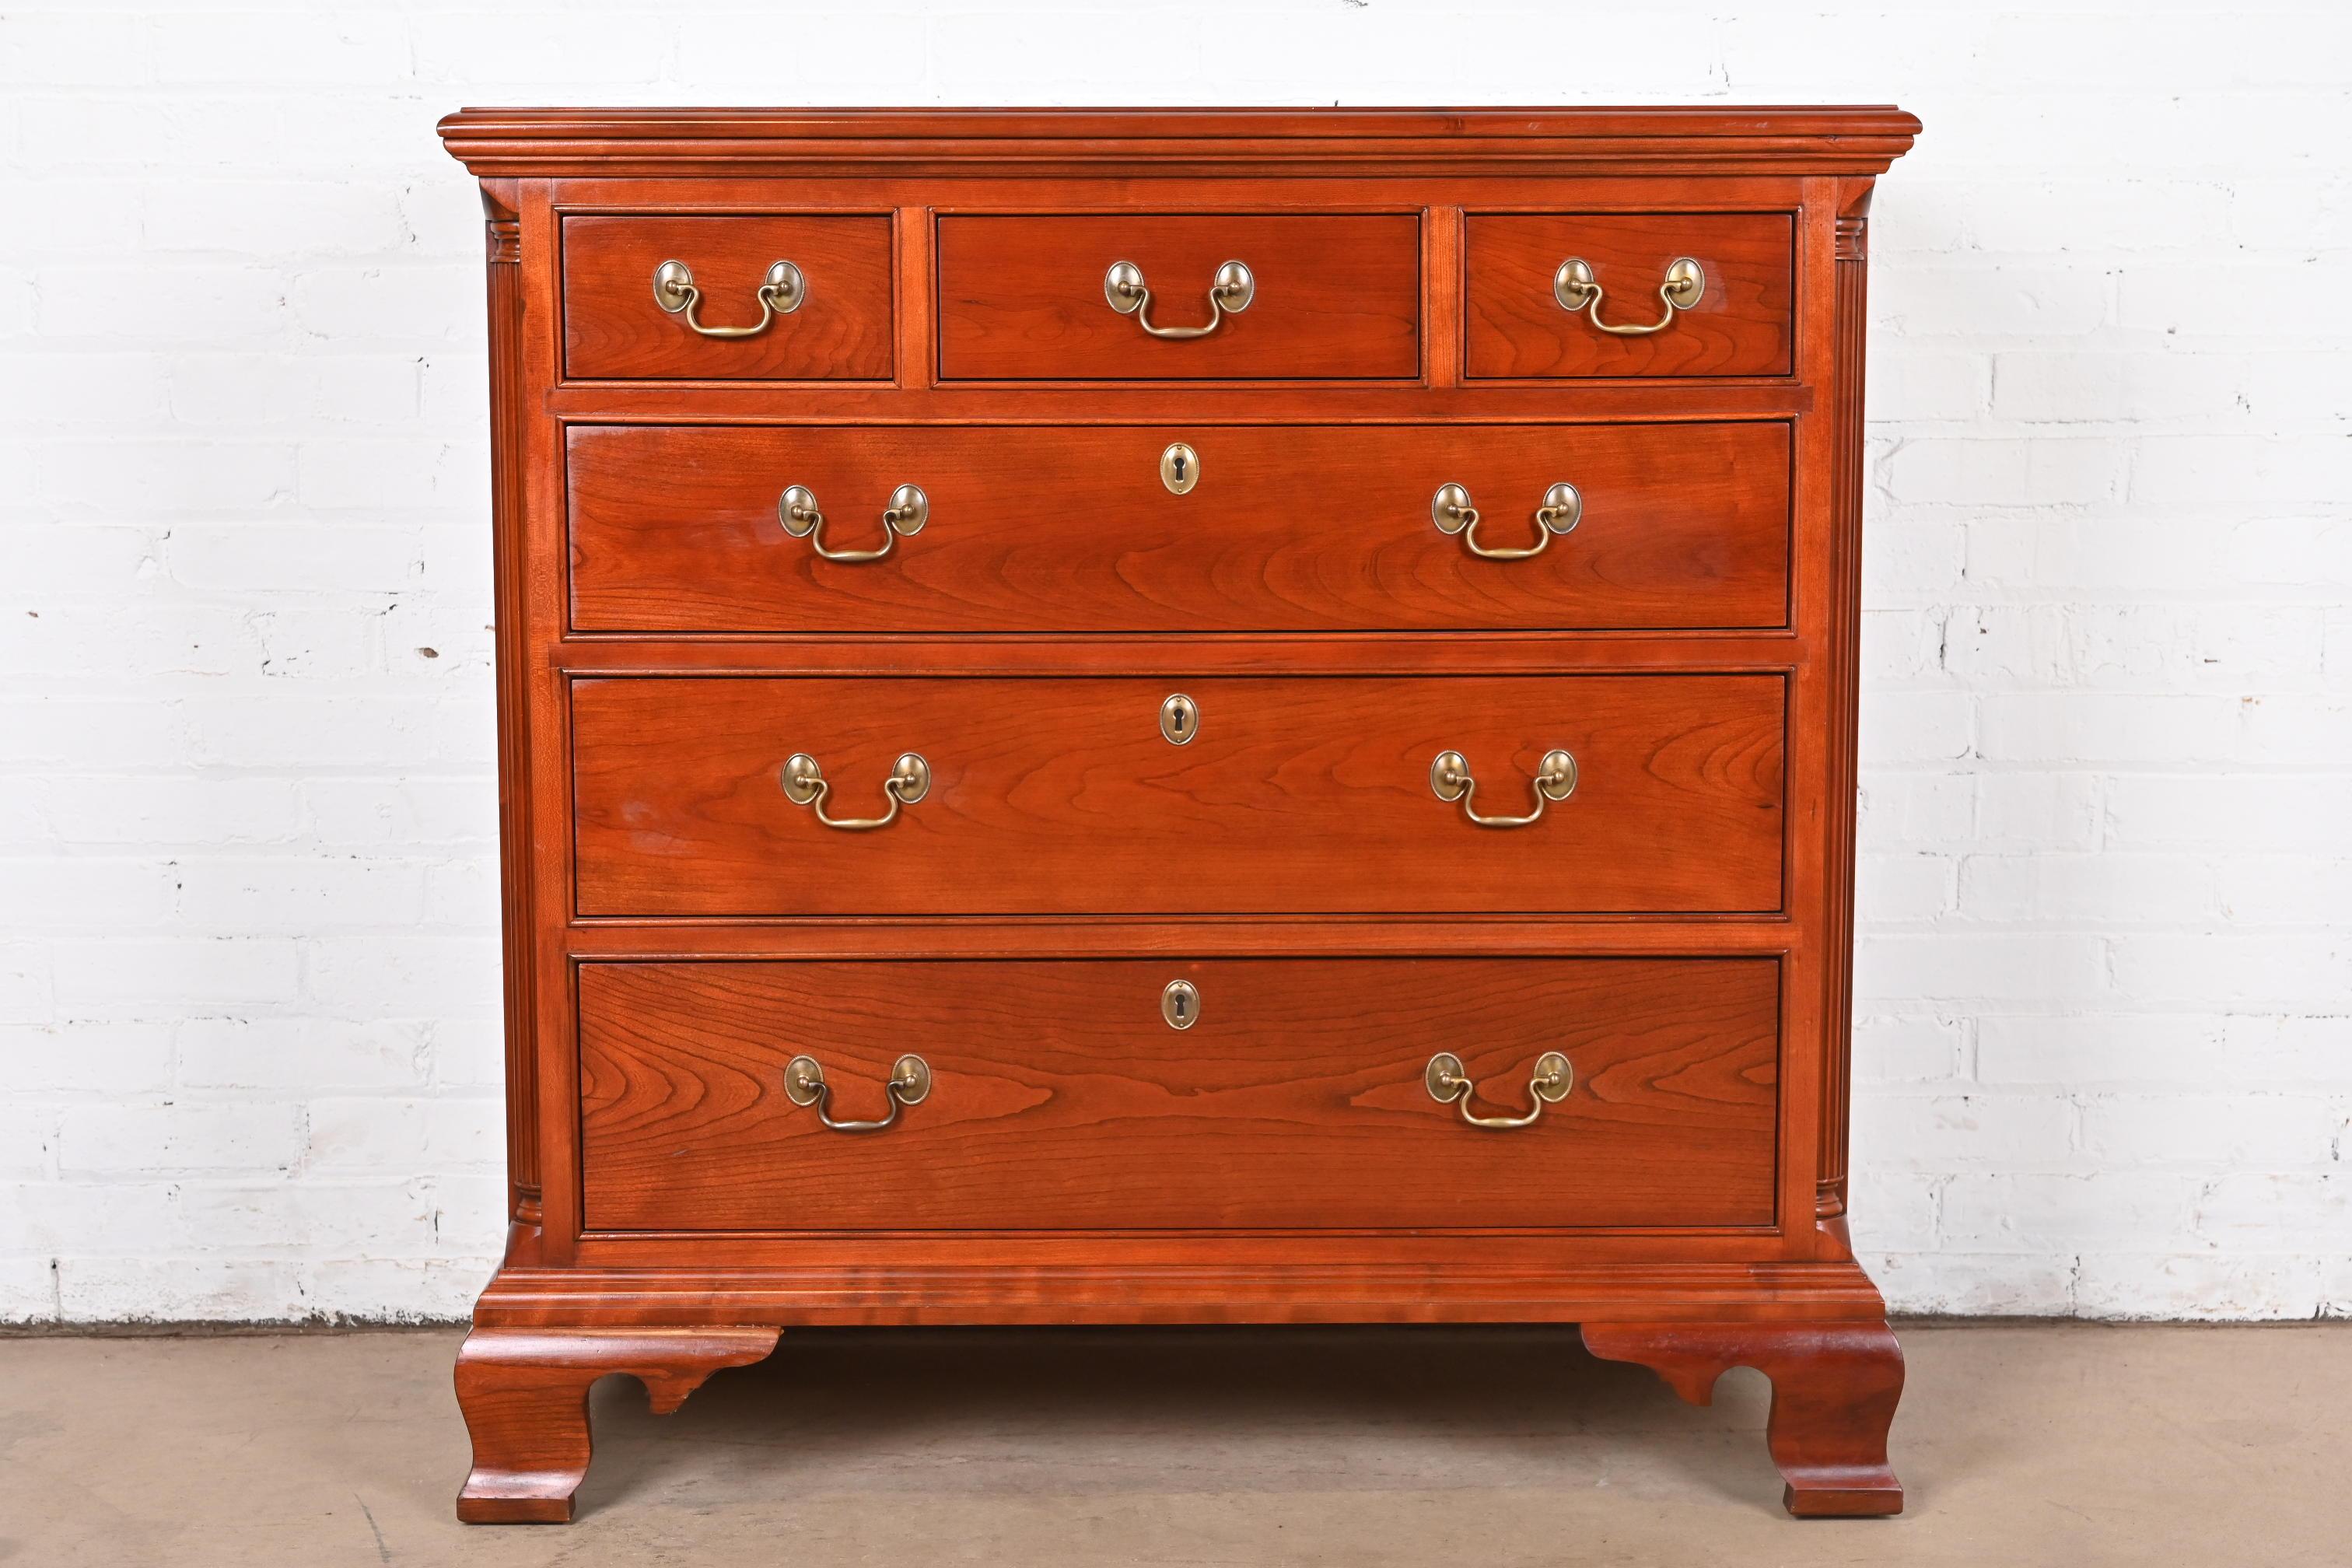 An exceptional Georgian or Chippendale style six-drawer dresser or chest of drawers

By Stickley

USA, Late 20th Century

Solid cherry wood, with original brass hardware.

Measures: 40.5